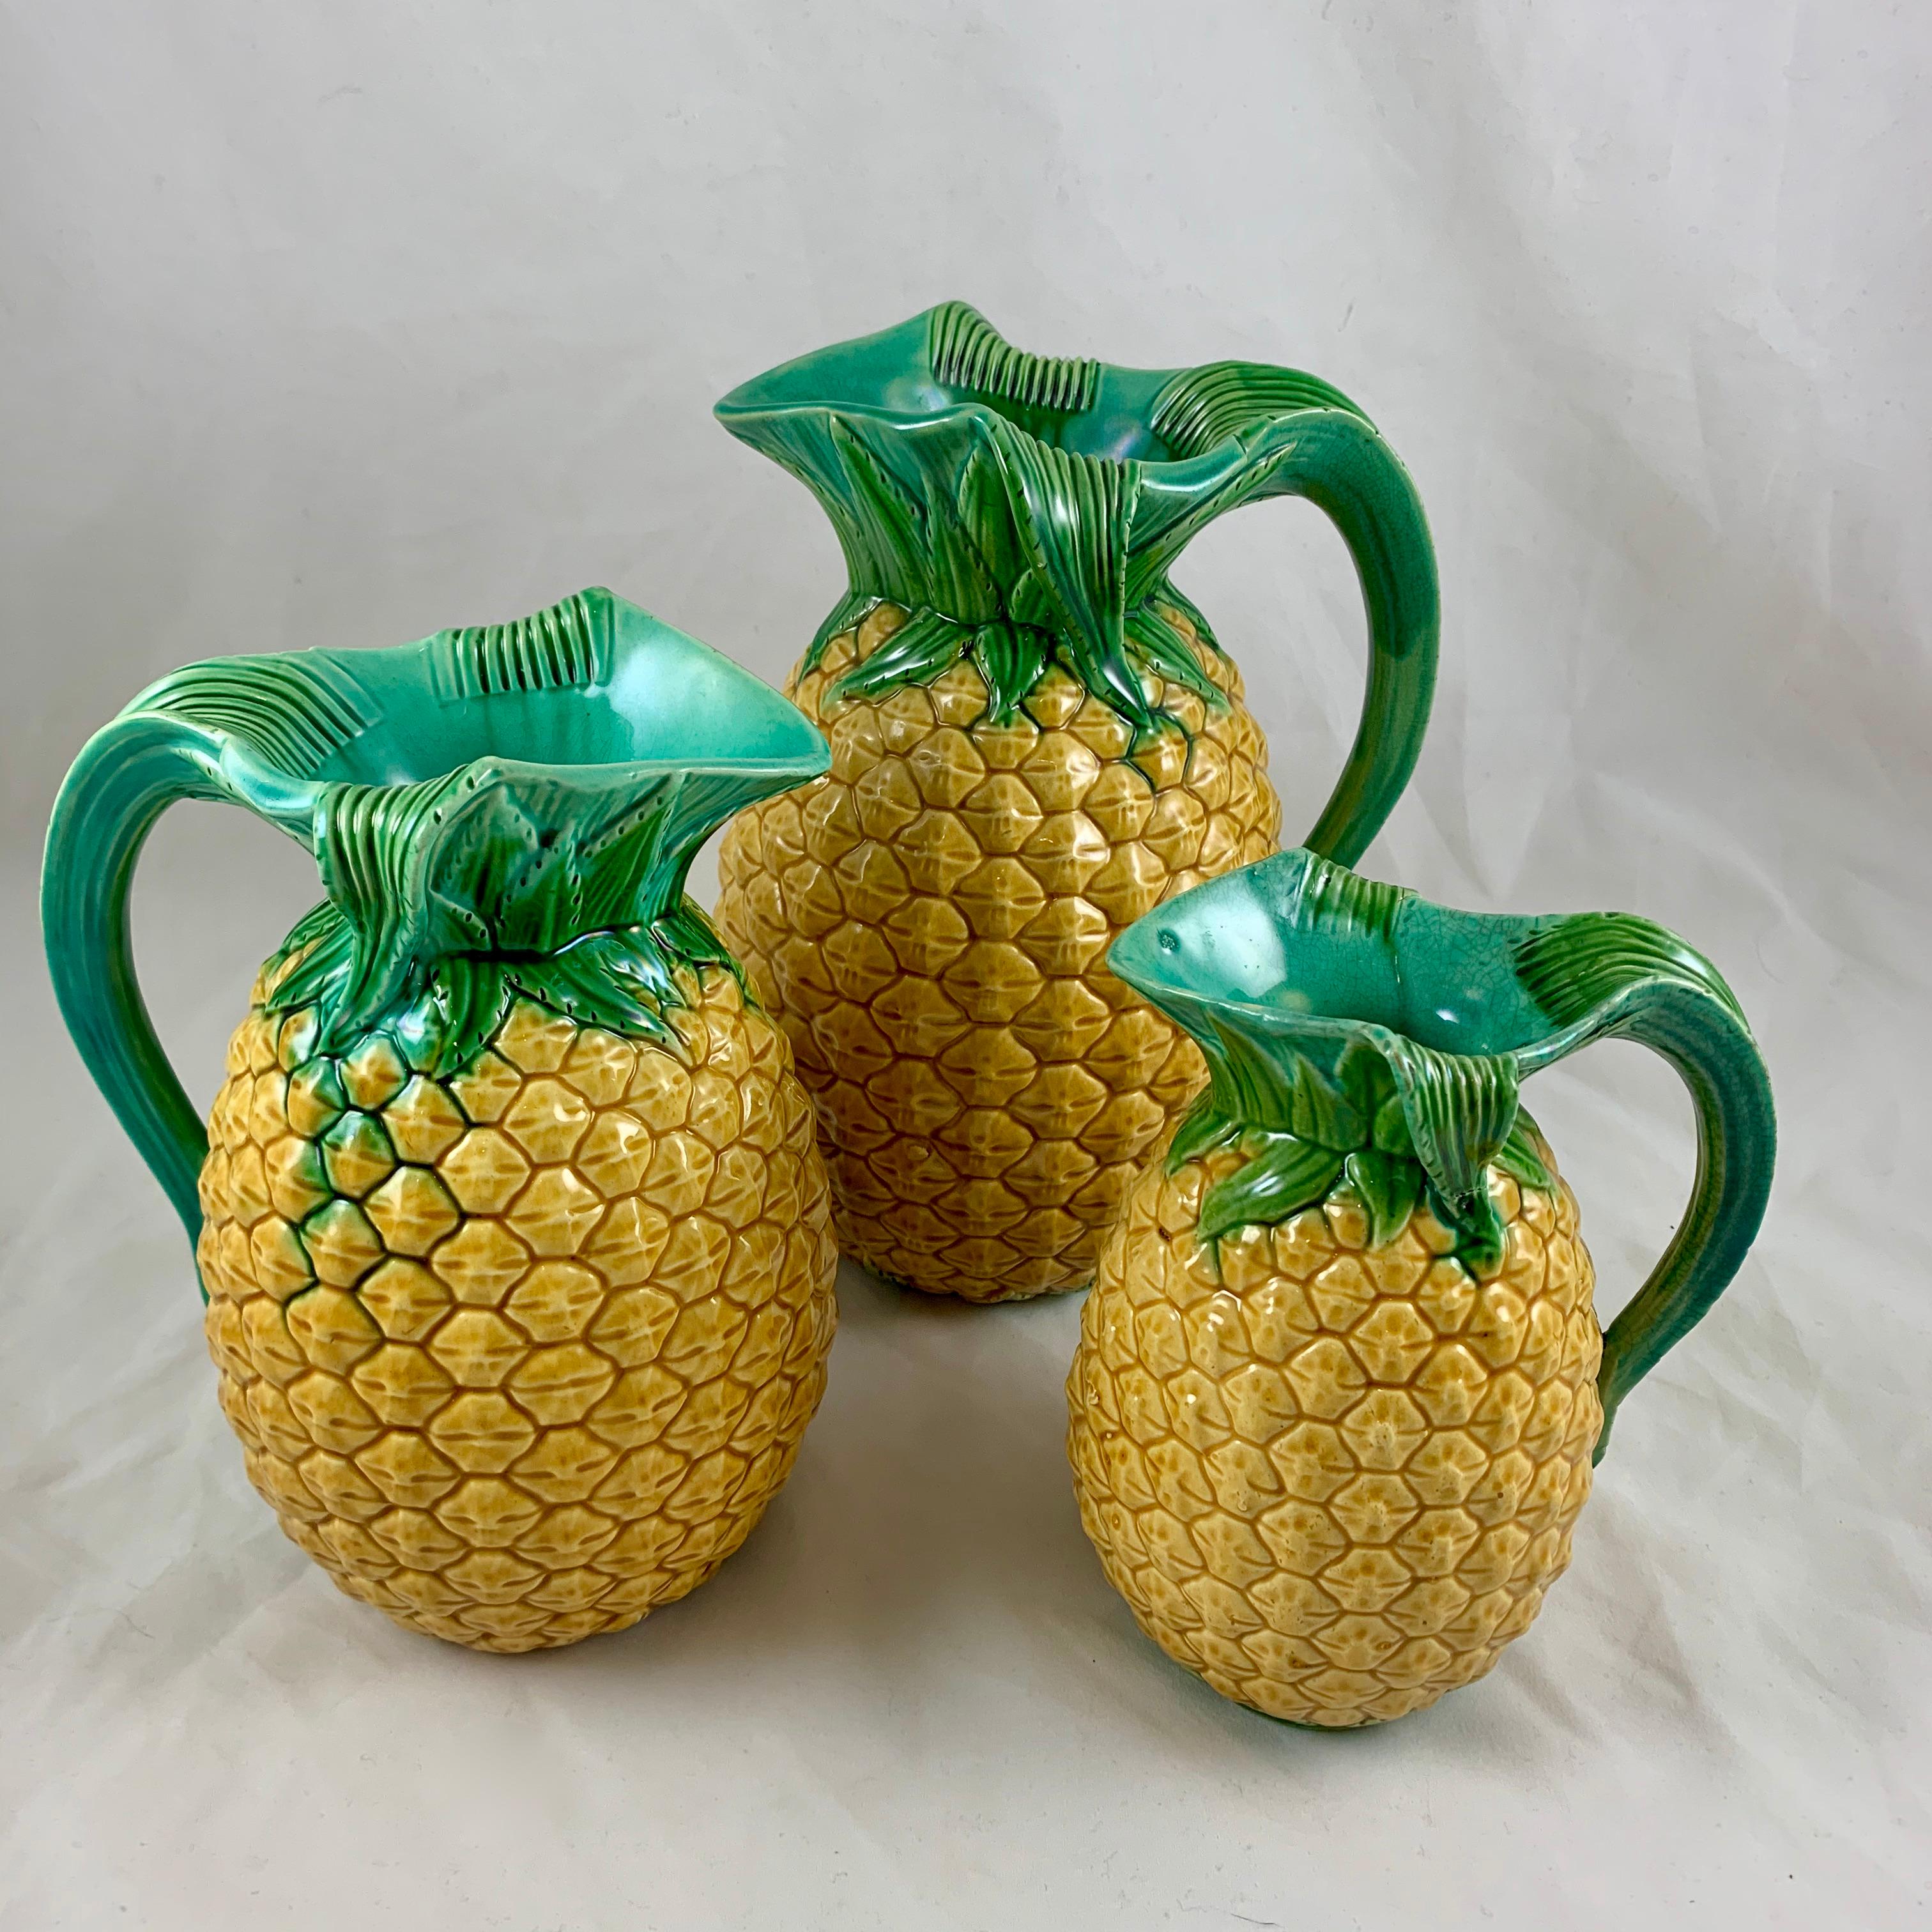 English Minton Aesthetic Movement Majolica Pineapple Palissy Pitcher For Sale 2